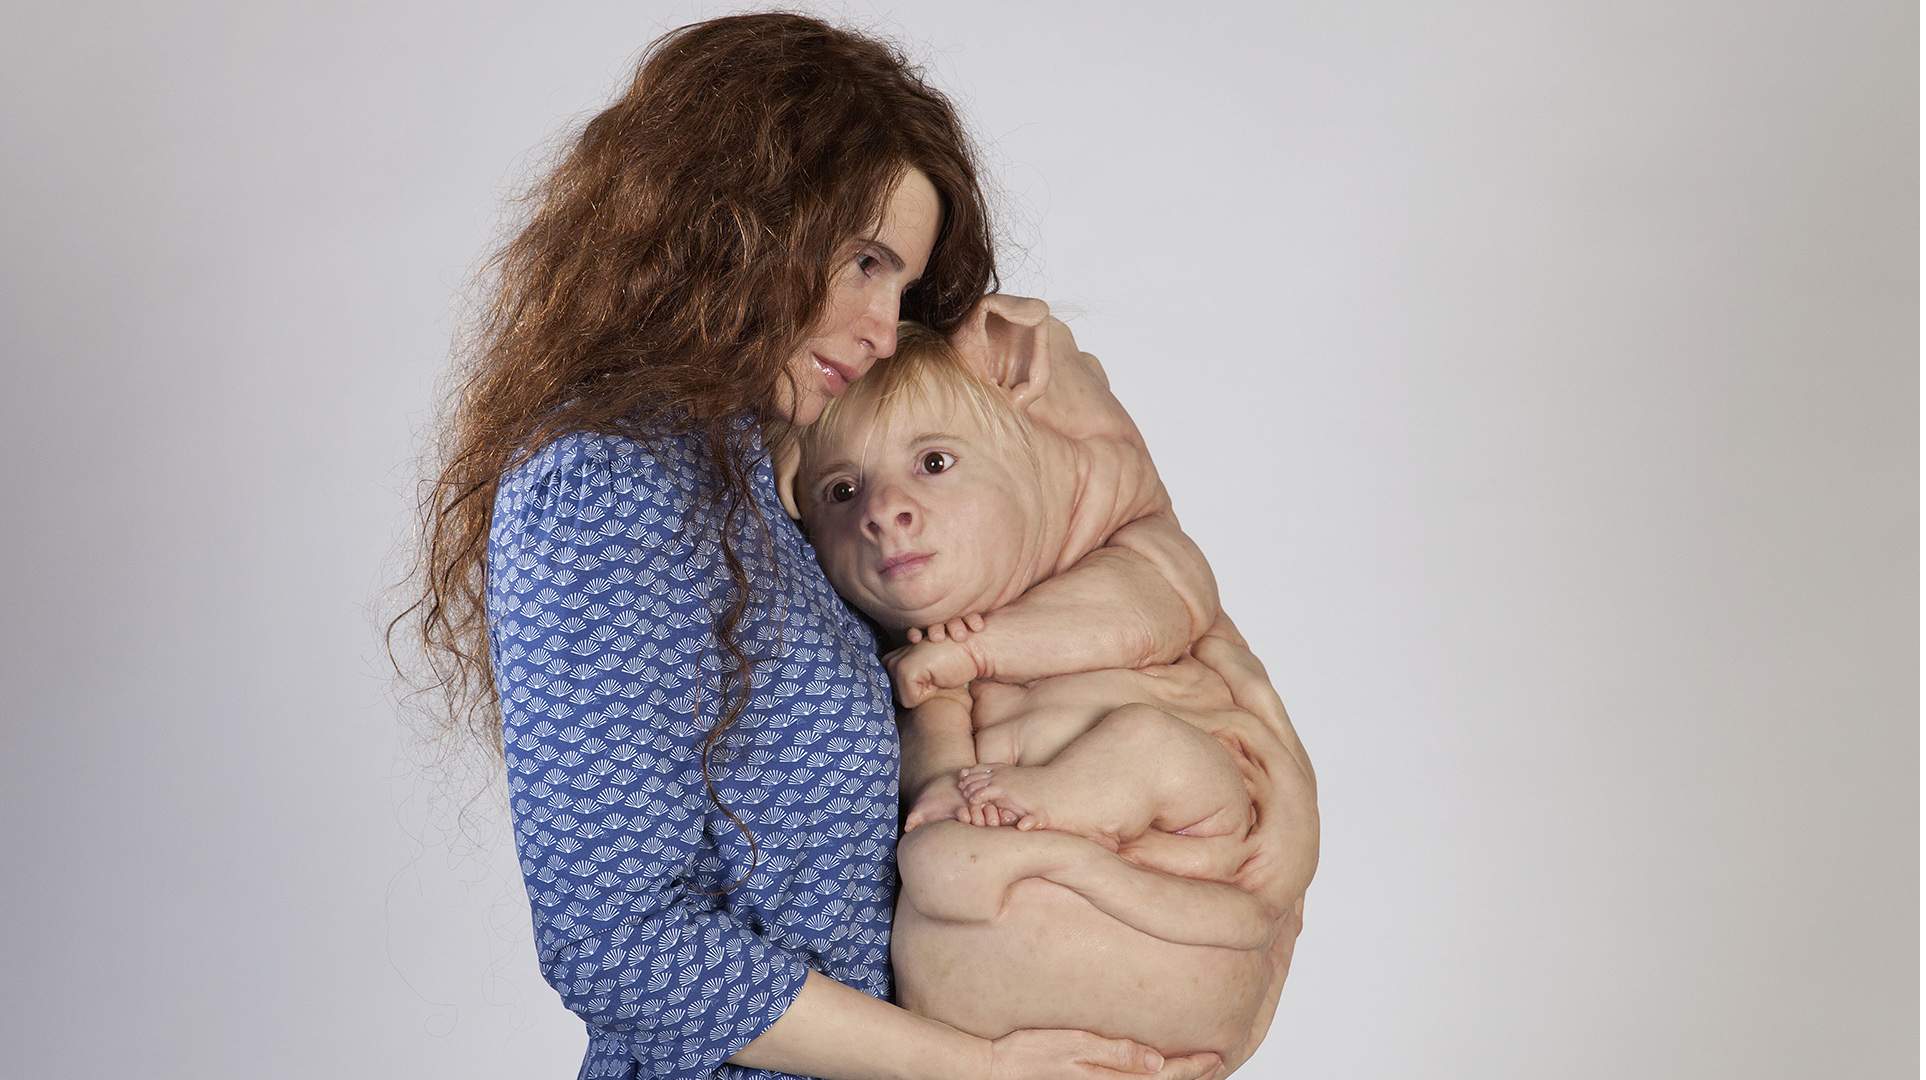 A Huge Solo Exhibition by Skywhale Artist Patricia Piccinini Is Coming to Brisbane's GOMA